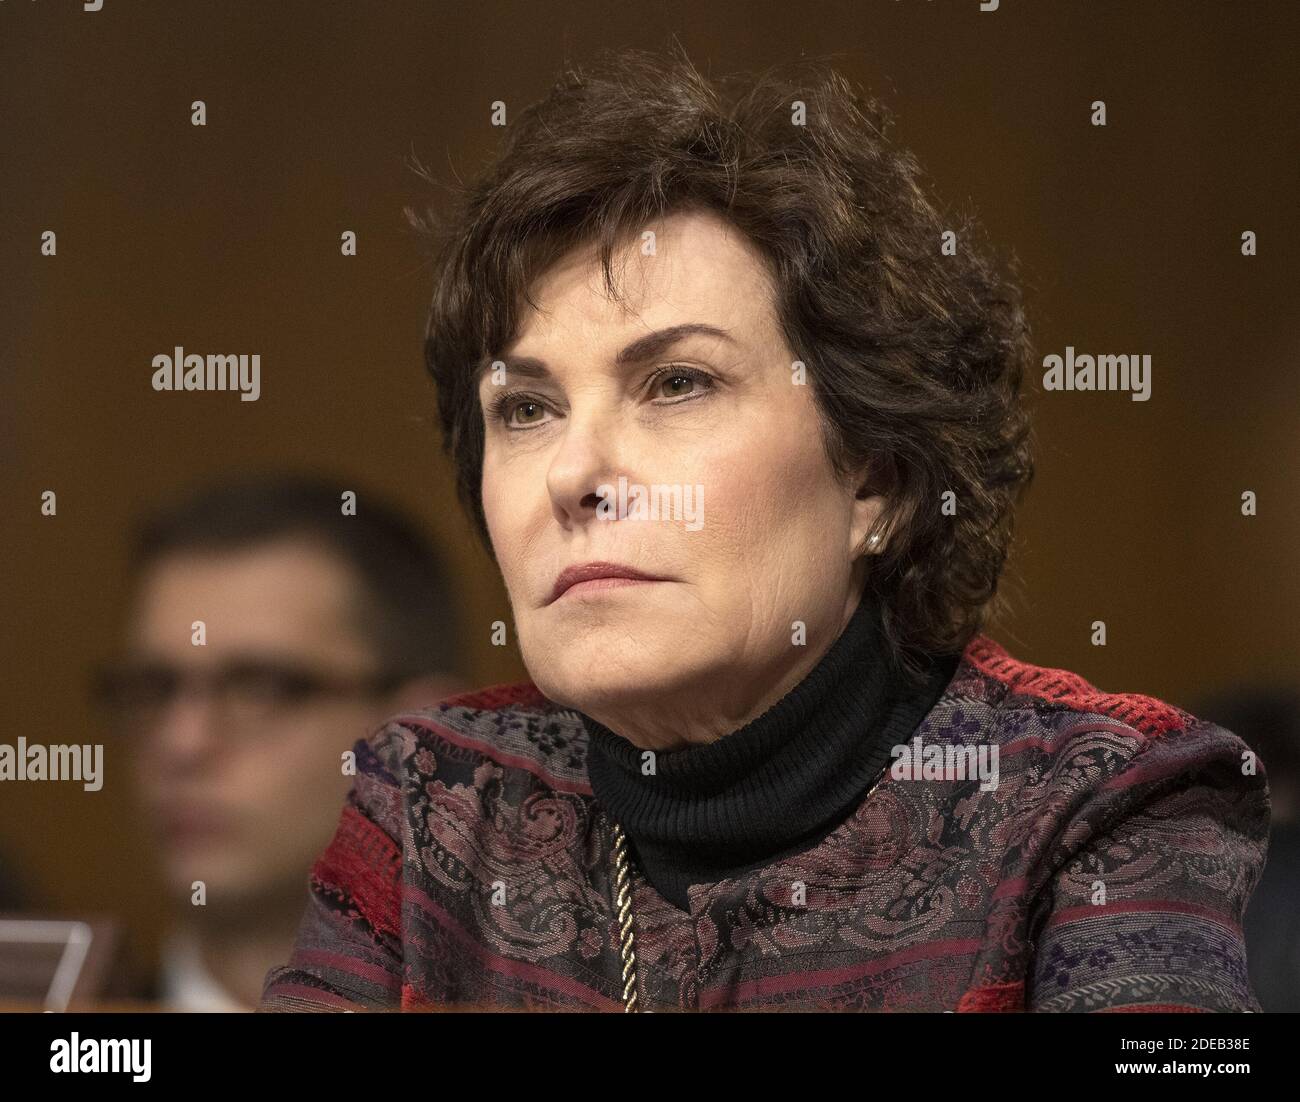 United States Senator Jacky Rosen (Democrat of Nevada) listens to the testimony before the US Senate Committee on Homeland Security and Governmental Affairs Permanent Subcommittee on Investigations during a hearing on "Examining Private Sector Data Breaches" on Capitol Hill in Washington, DC on Thursday, March 7, 2019.Photo by Ron Sachs/CNP/ABACAPRESS.COM Stock Photo